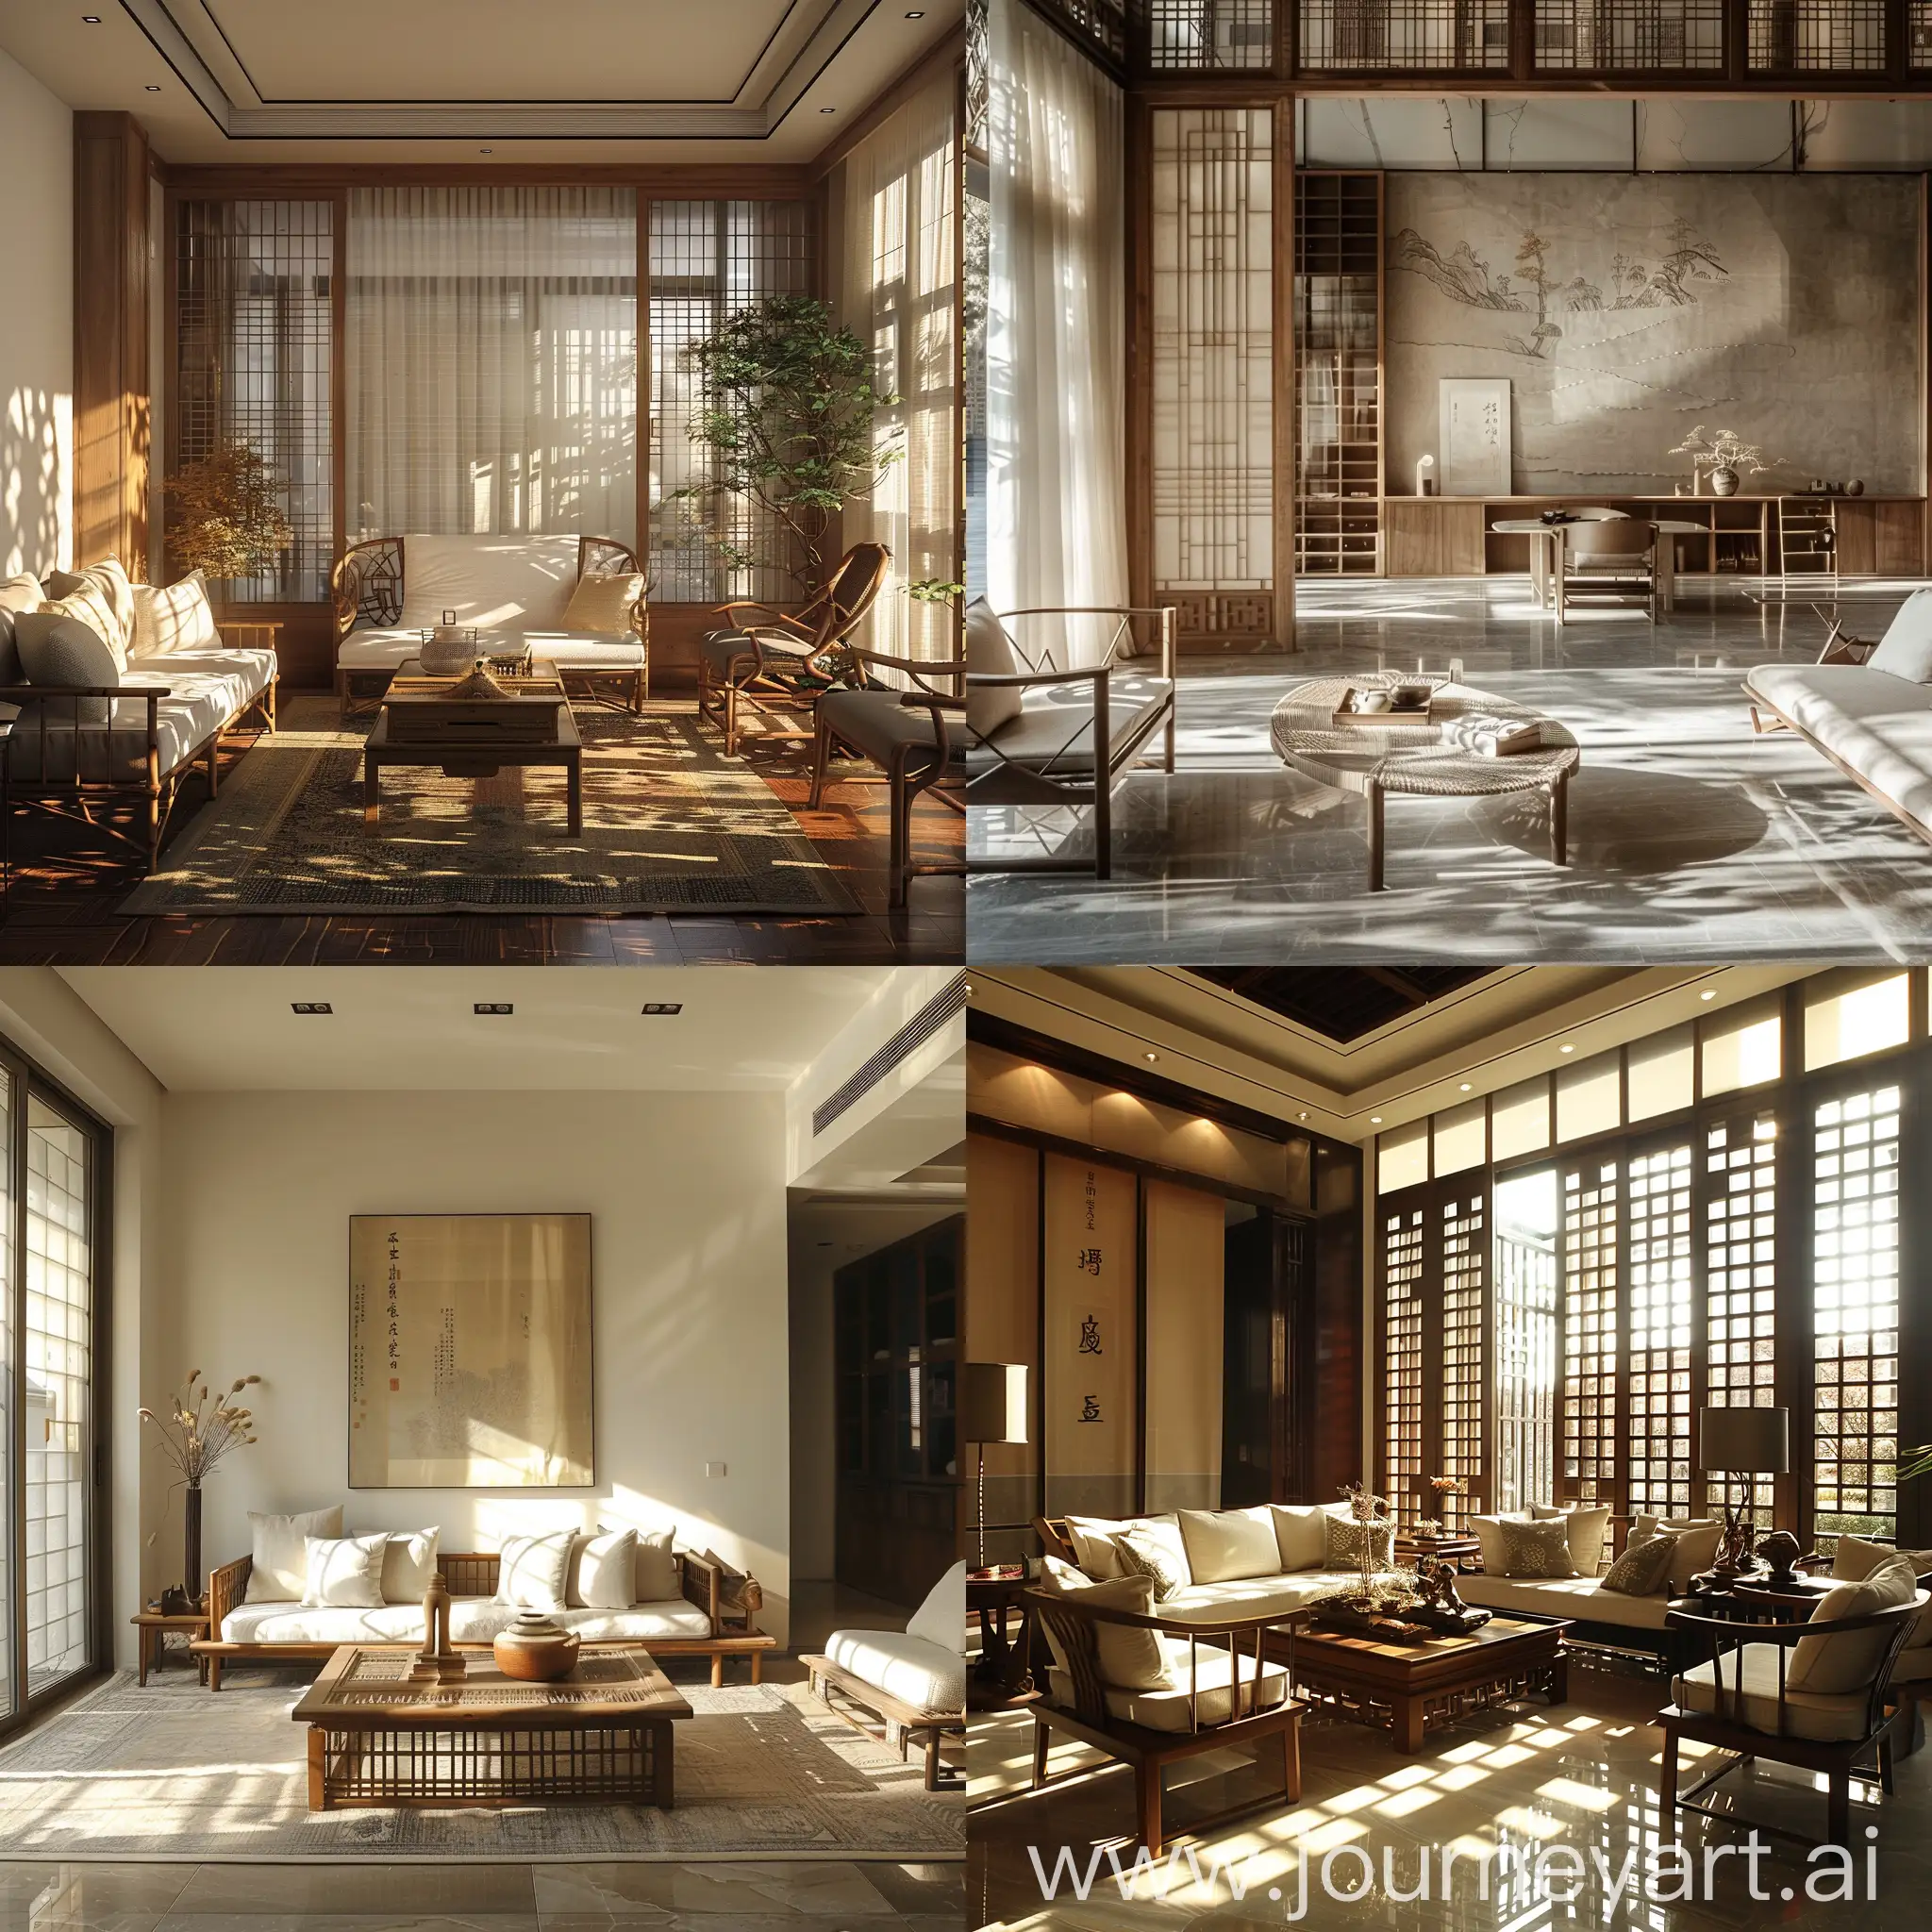 Sunlit-Chinesestyle-Living-Room-Interior-Design